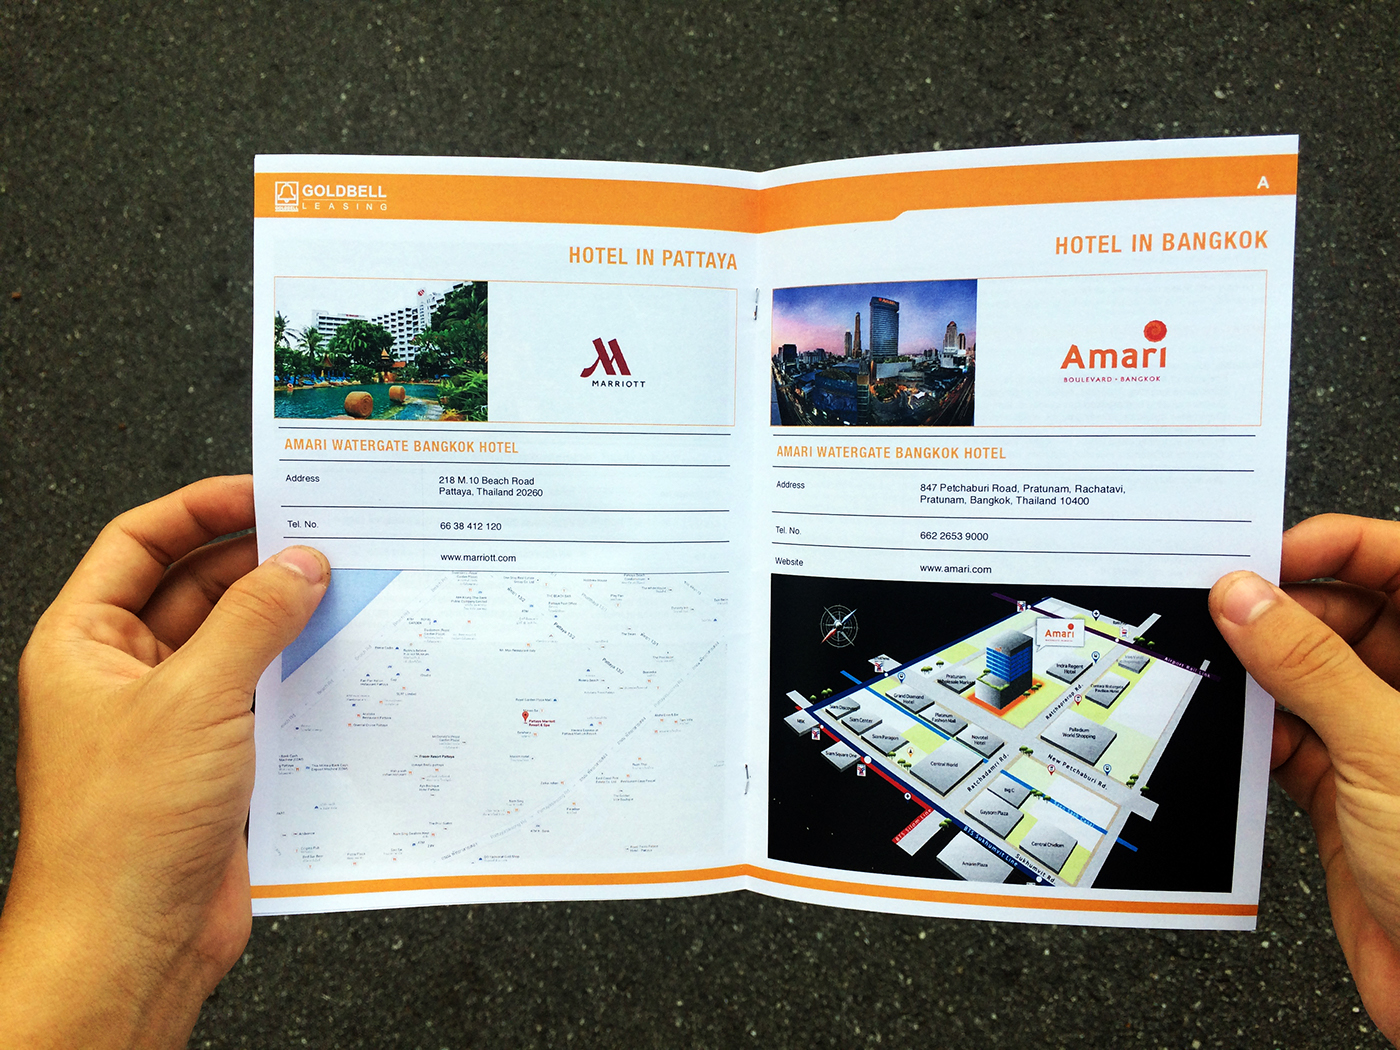 goldbell Thailand Mitsubishi singapore leasing Forklift itinerary booklet small budget A4 paper clip staple bind graphicdesign editorialdesign